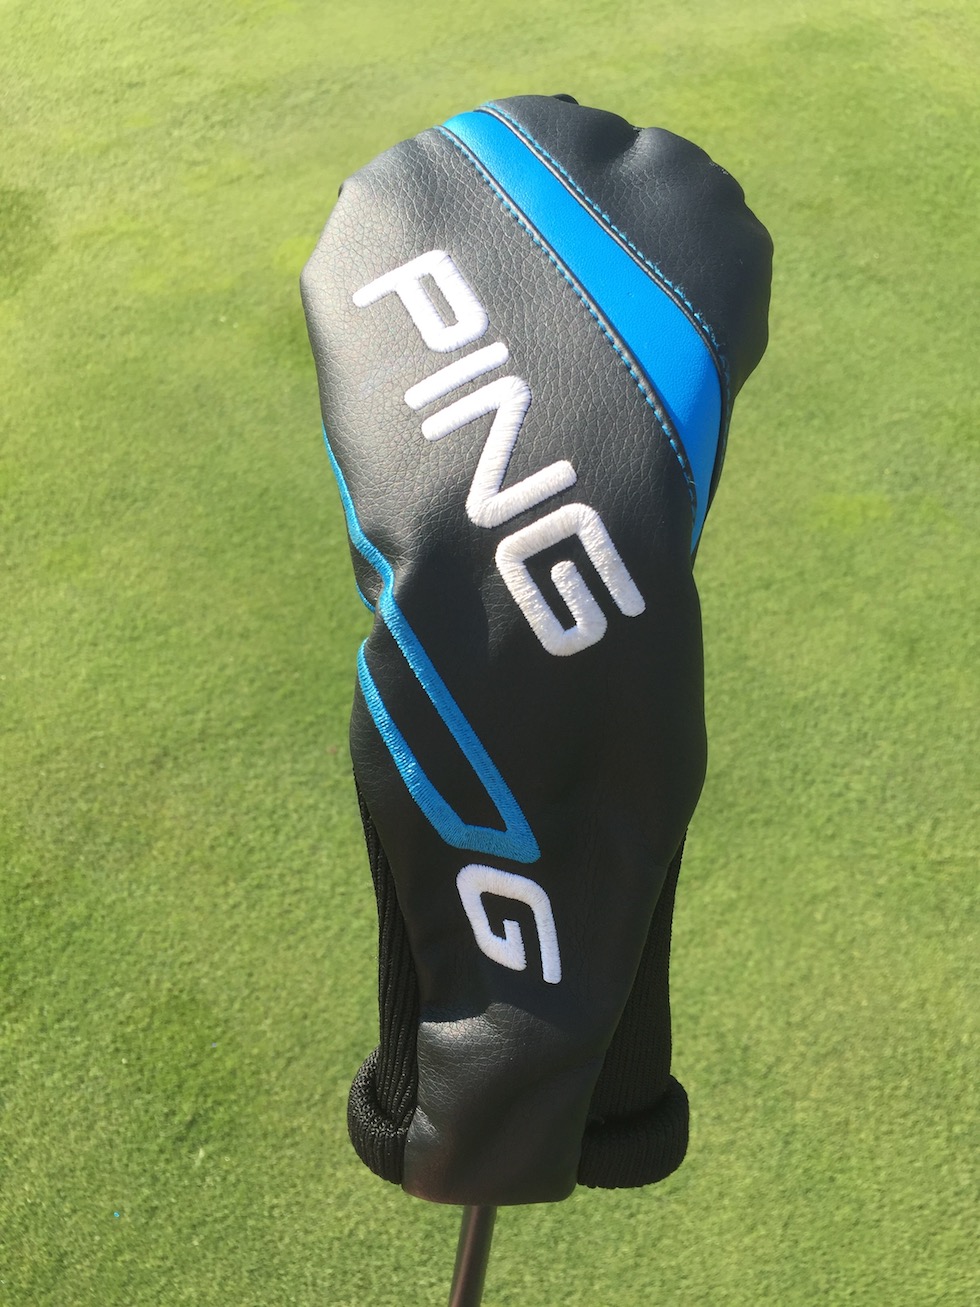 PING 2016 G Series Headcover